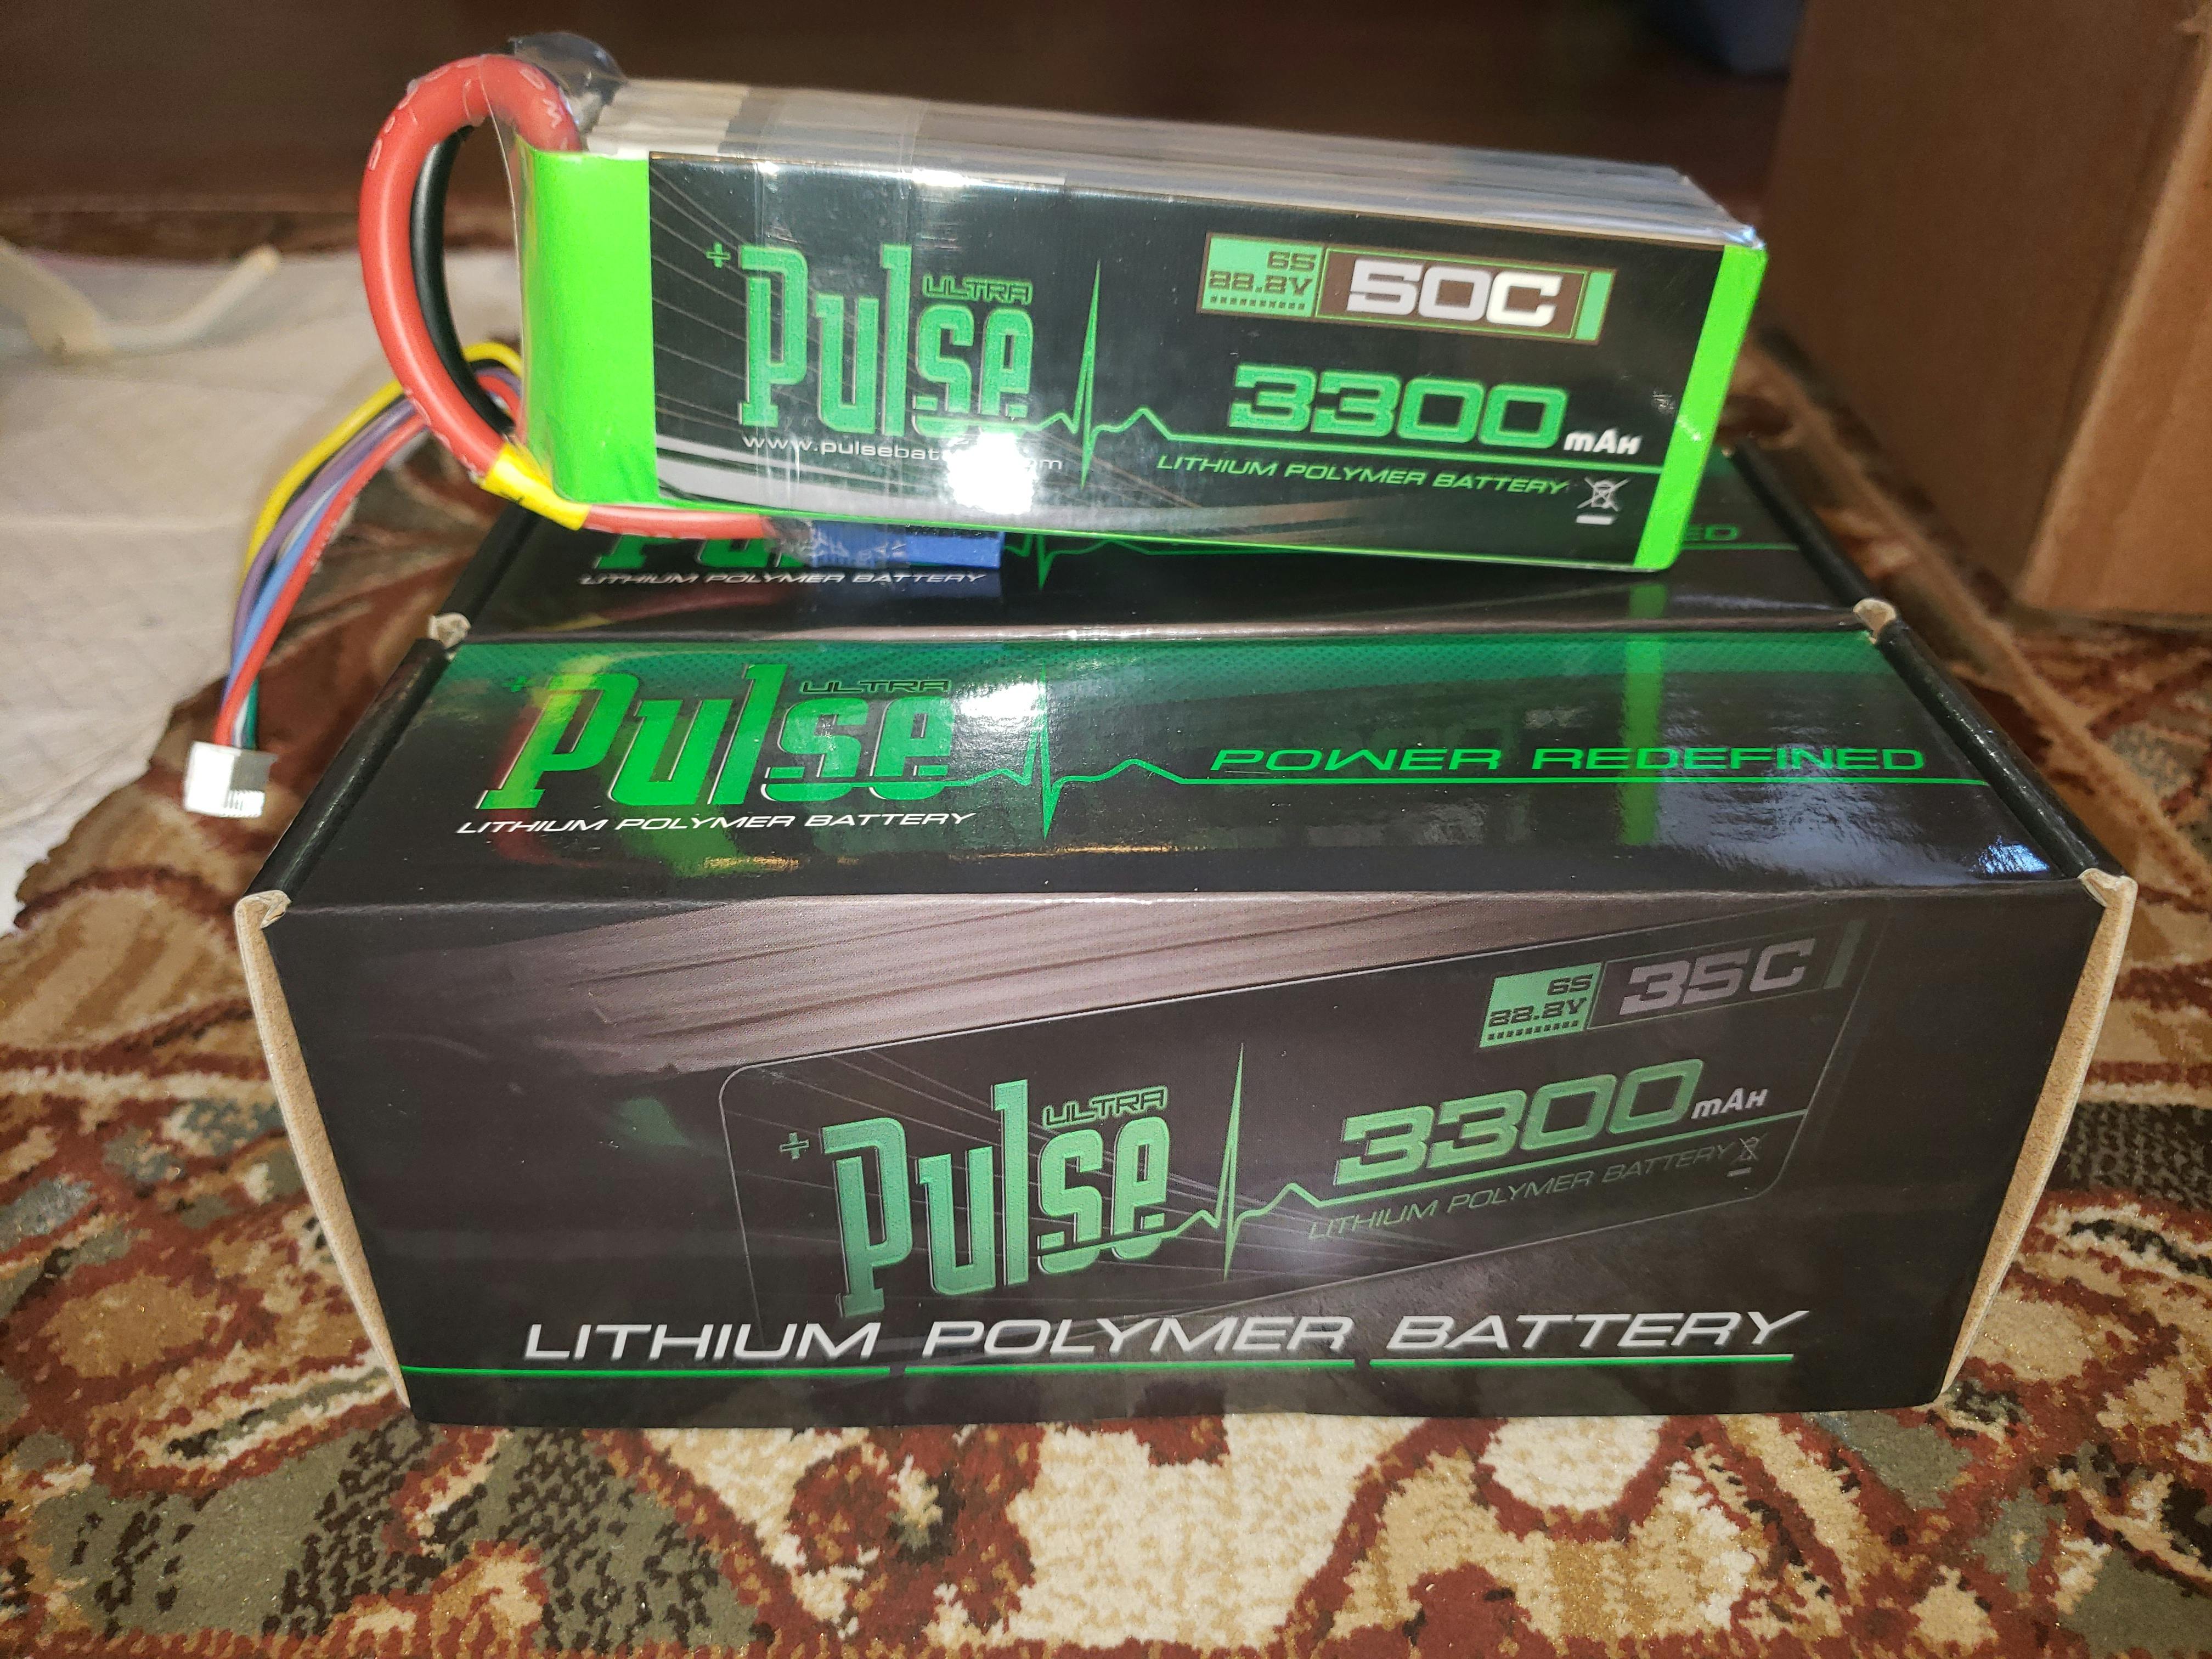 battery pulse conditioning